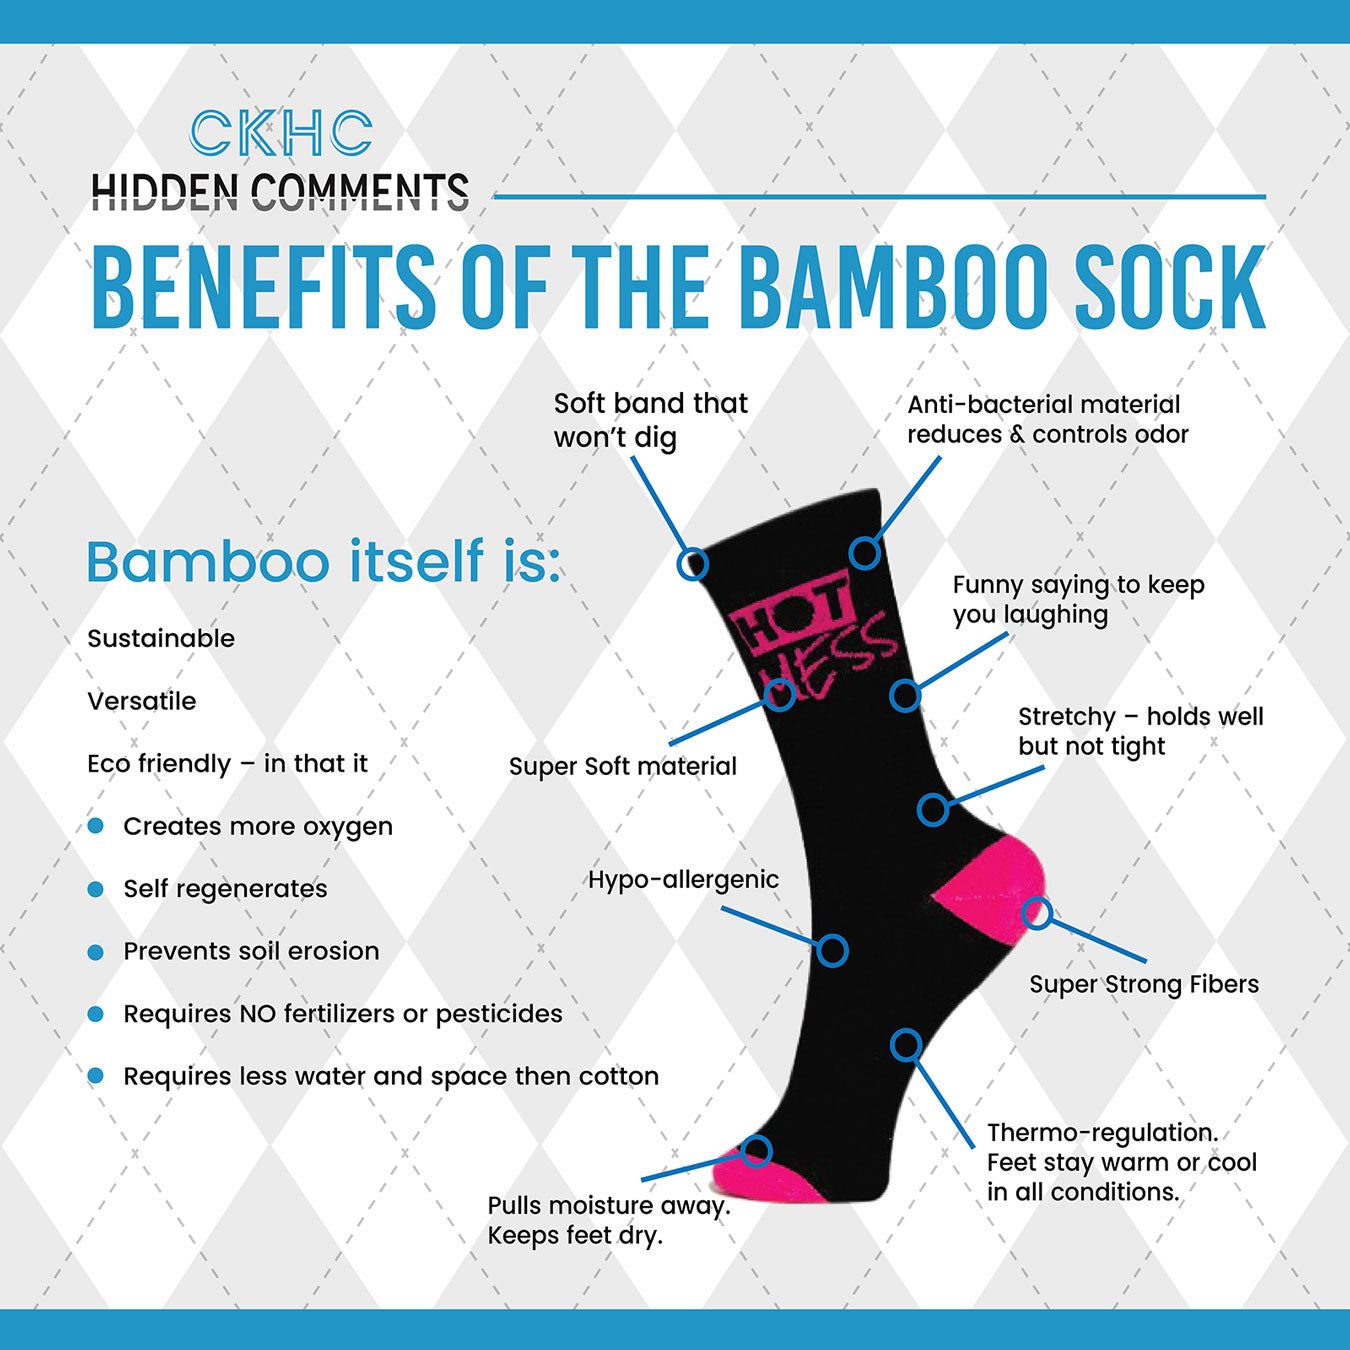 Benefits of the bamboo sock